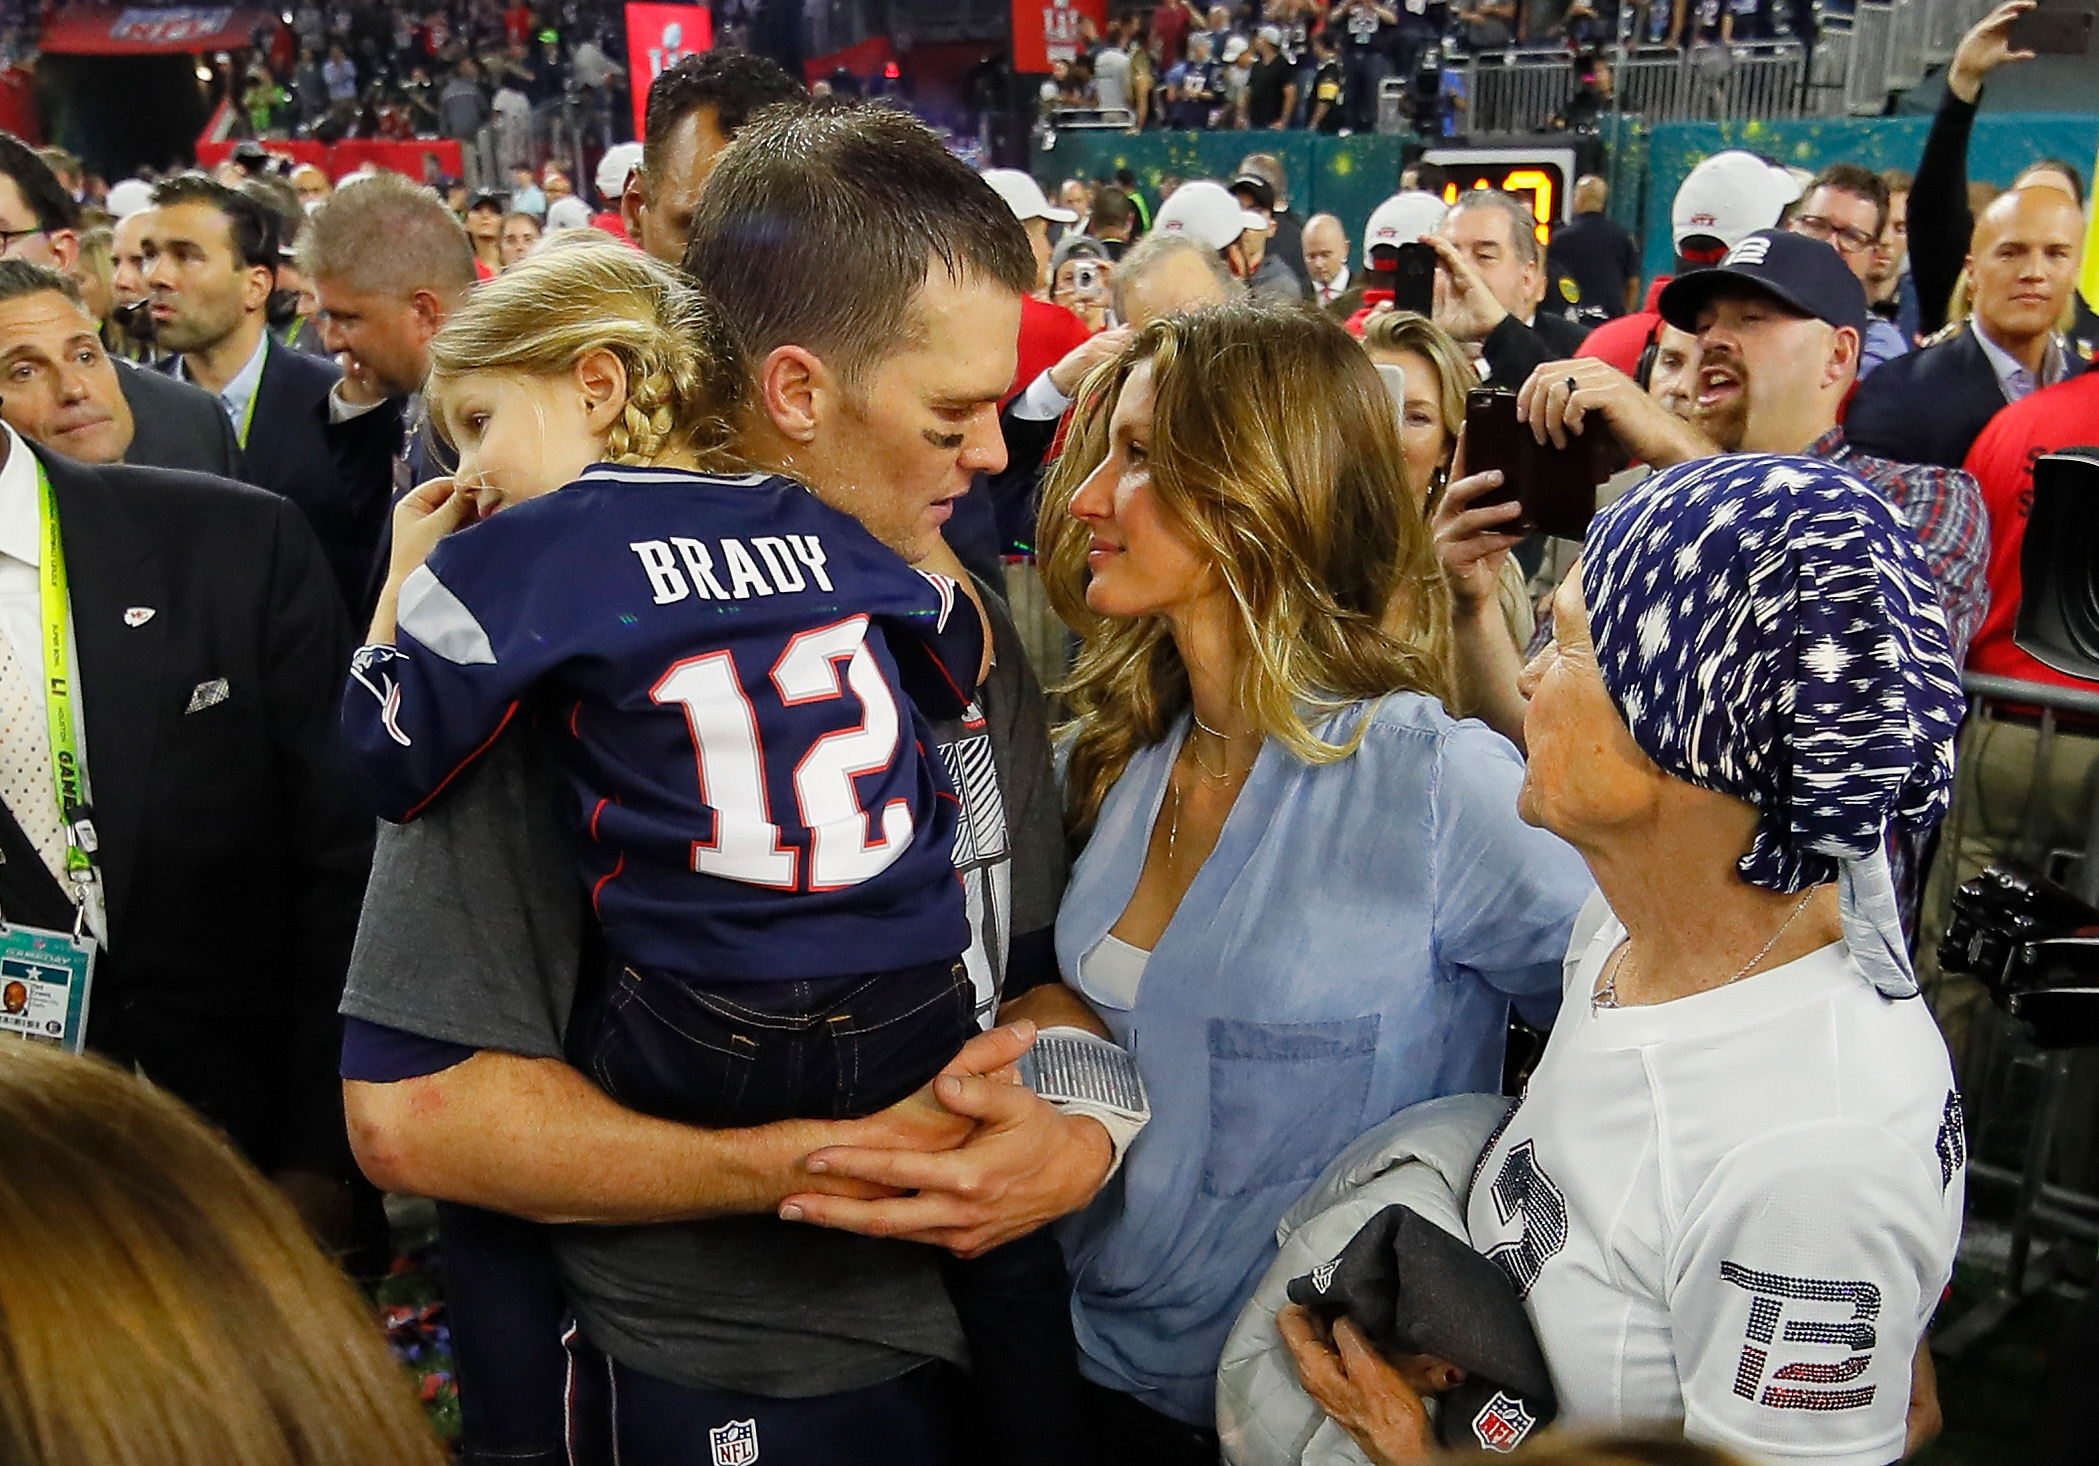 PHOTO: Tom Brady #12 of the New England Patriots celebrates with wife Gisele Bundchen and daughter Vivian Brady after defeating the Atlanta Falcons during Super Bowl 51 at NRG Stadium, Feb. 5, 2017 in Houston.